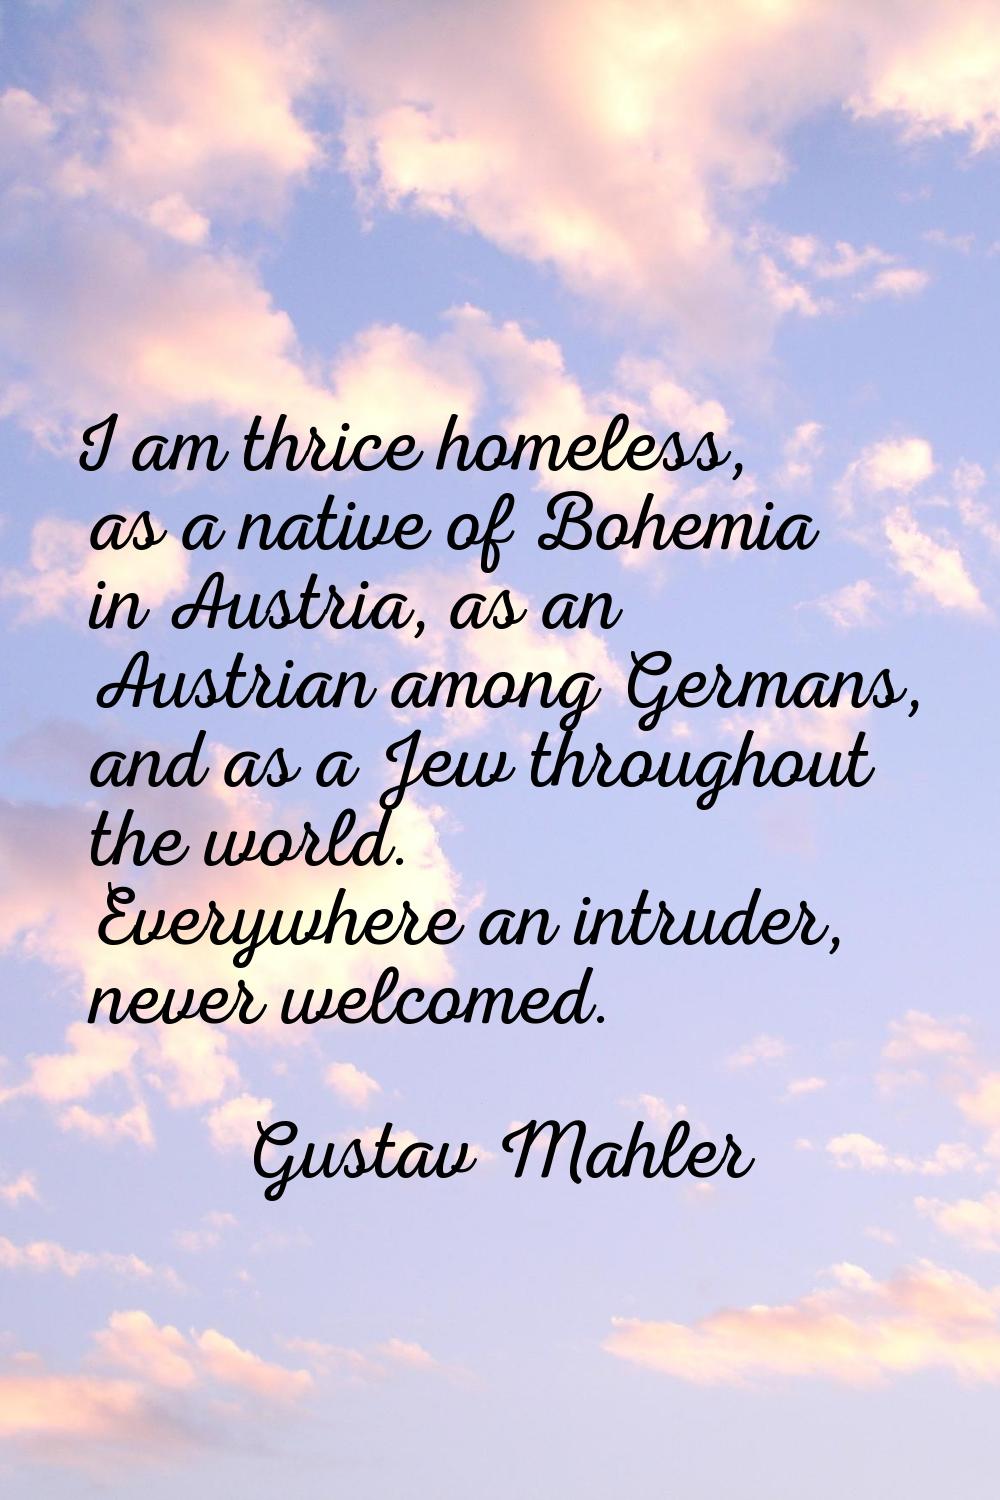 I am thrice homeless, as a native of Bohemia in Austria, as an Austrian among Germans, and as a Jew